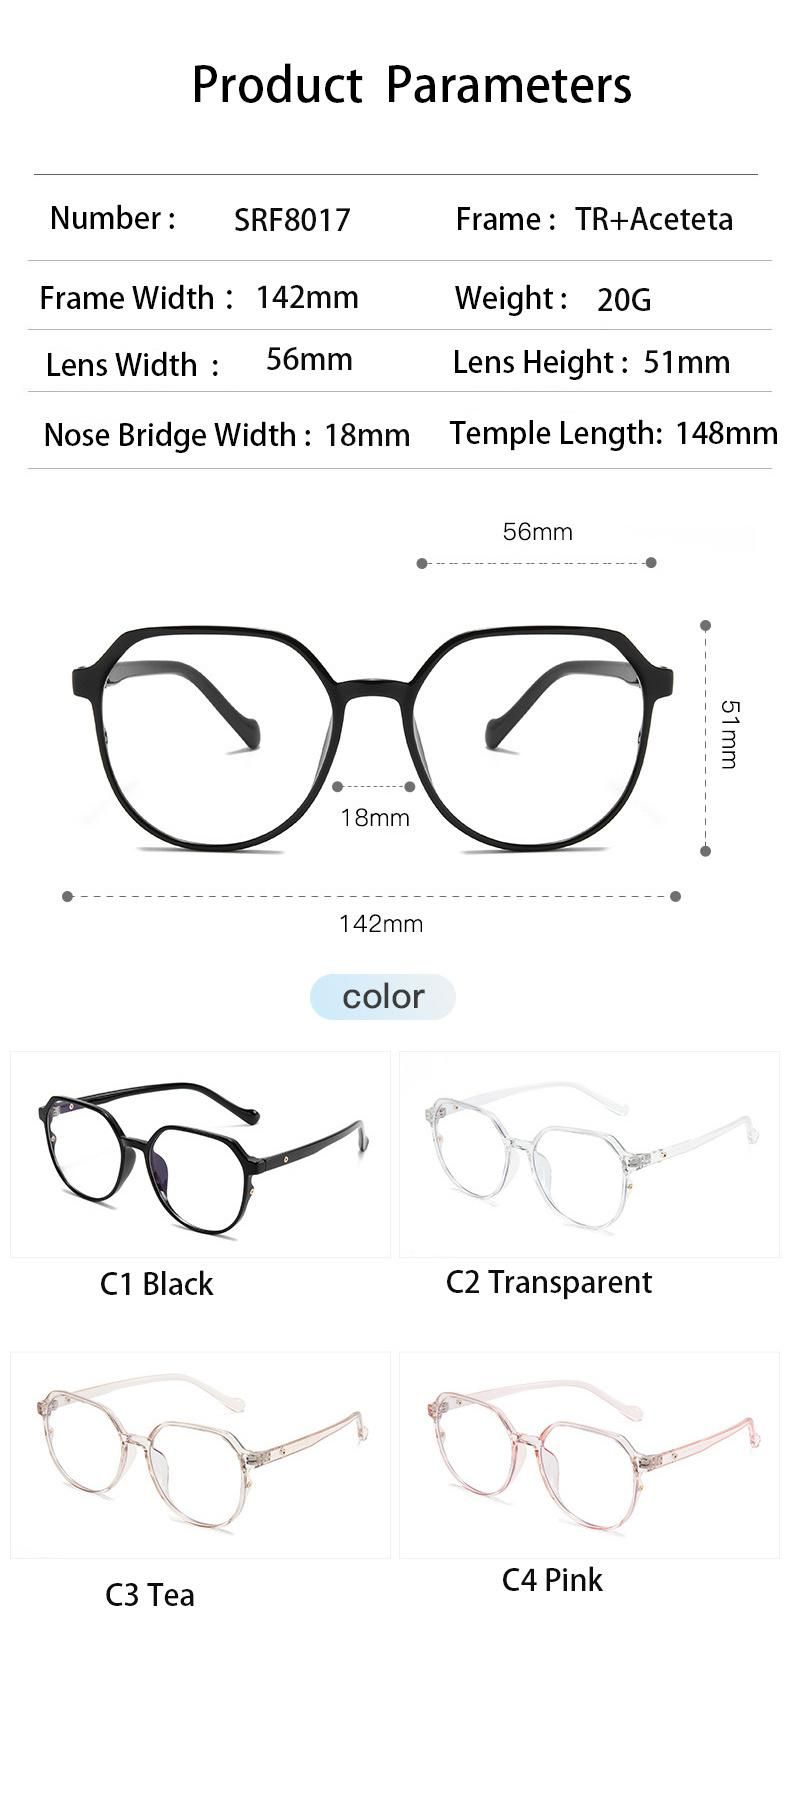 2022 New Tr90 Glasses Frame Classic Ins Wind Pigment Anti Blue Light with Myopia Frame Student Optical Flat Lens Korean Version